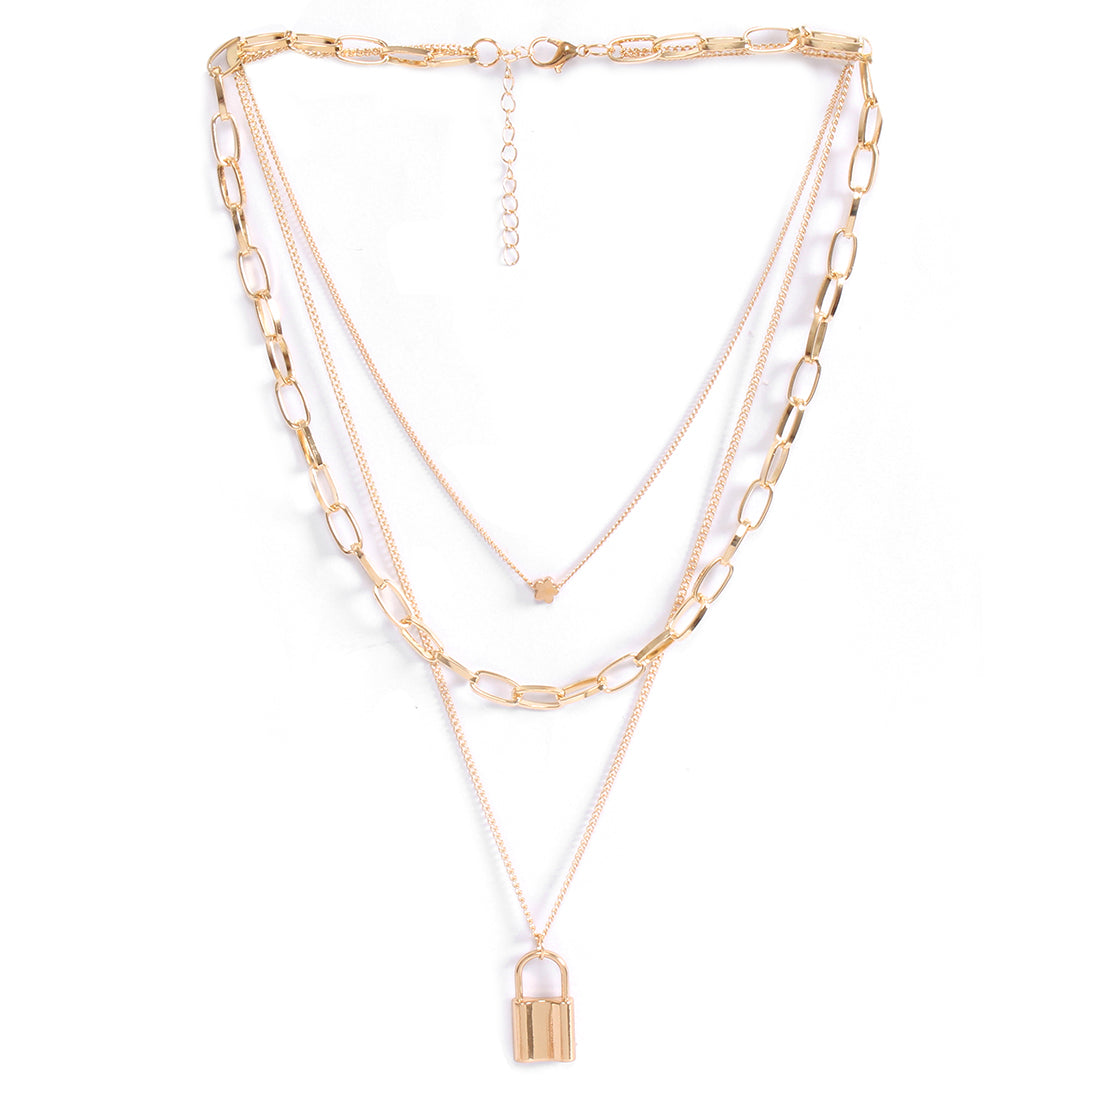 LOCK & MINI FLOWER PENDANT STATEMENT GOLD-TONED CHAIN LINK LAYERED NECKLACE